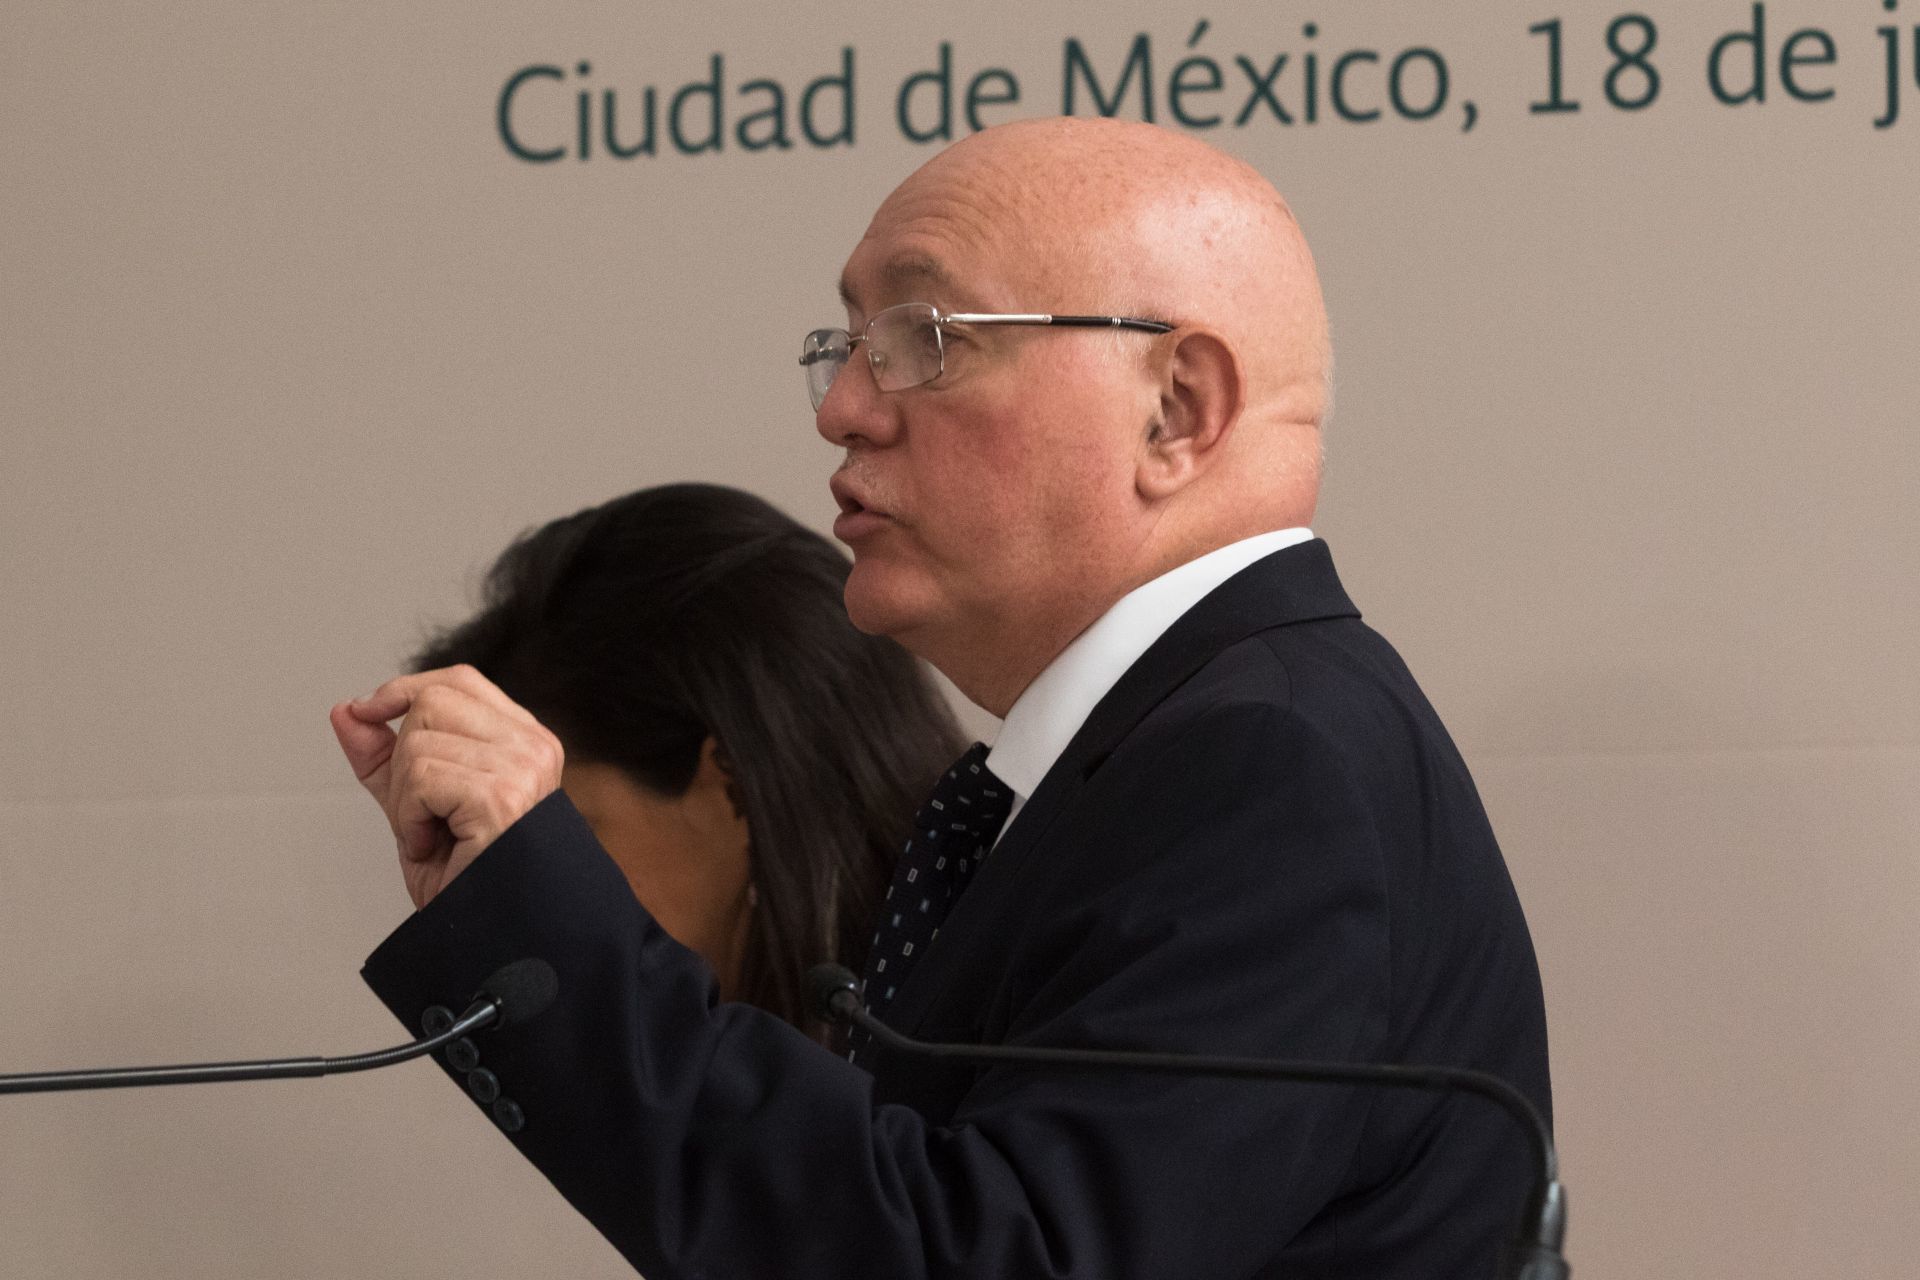 FORMER AMLO and EPN members lead audit, review public spending